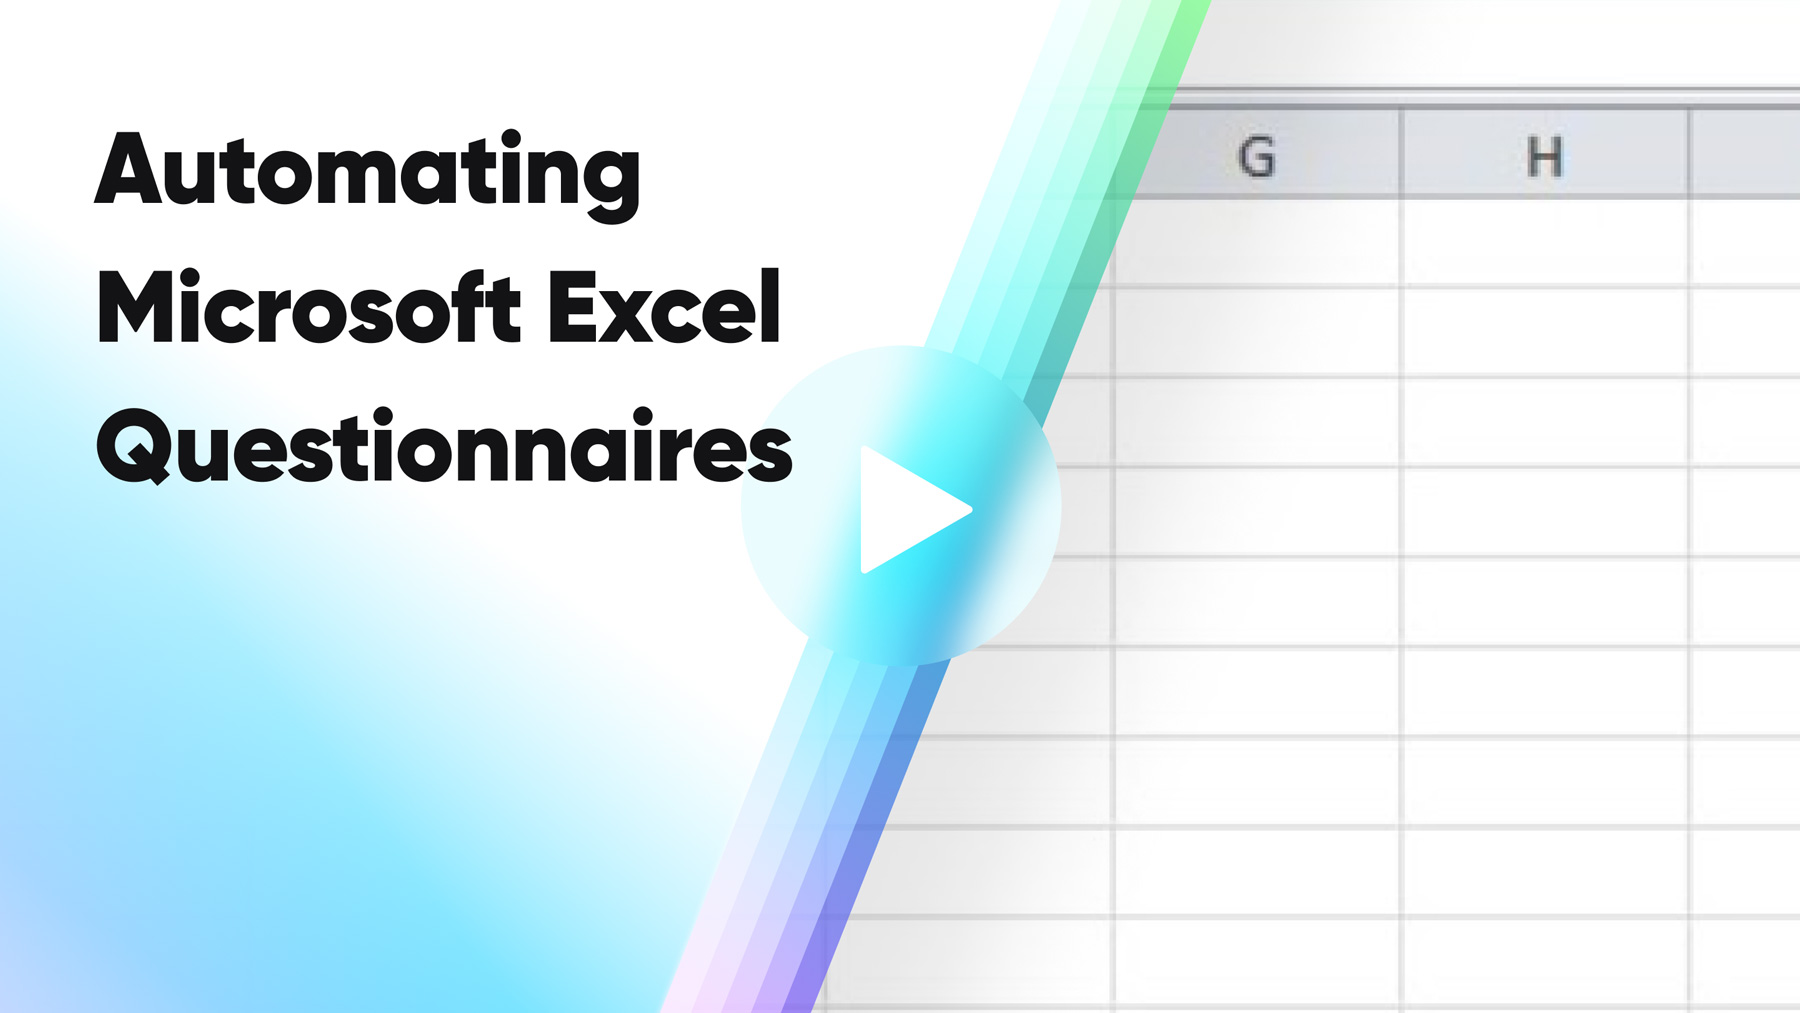 How to Automate Microsoft Excel Questionnaires